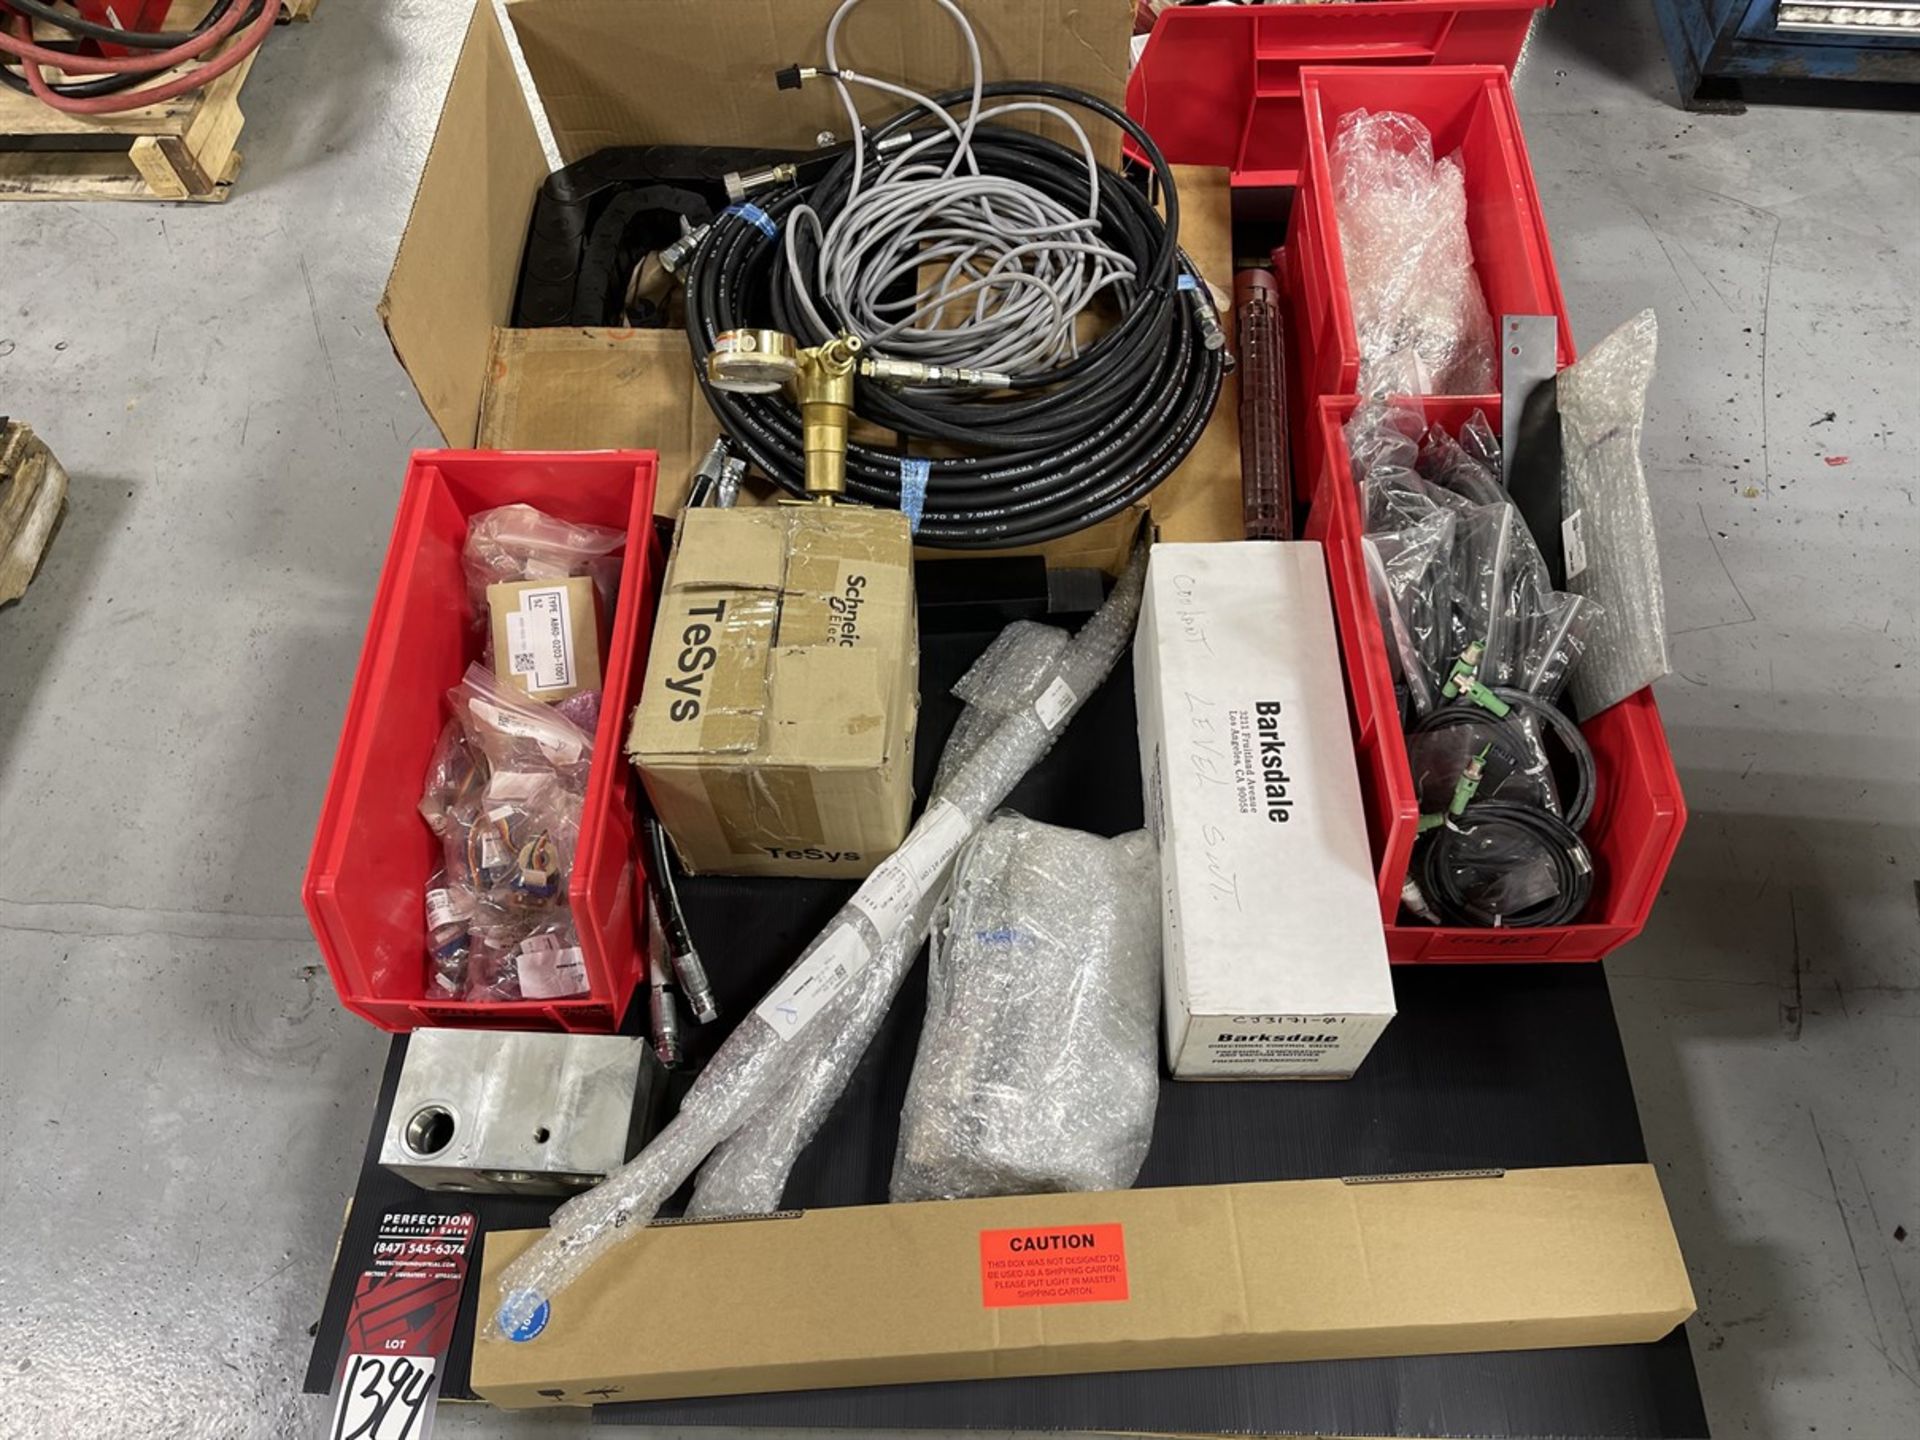 Lot of (2) Pallets of Bearings, Pressure Gages, Hydraulic Hoses, Switches and Communication Cable - Image 2 of 3